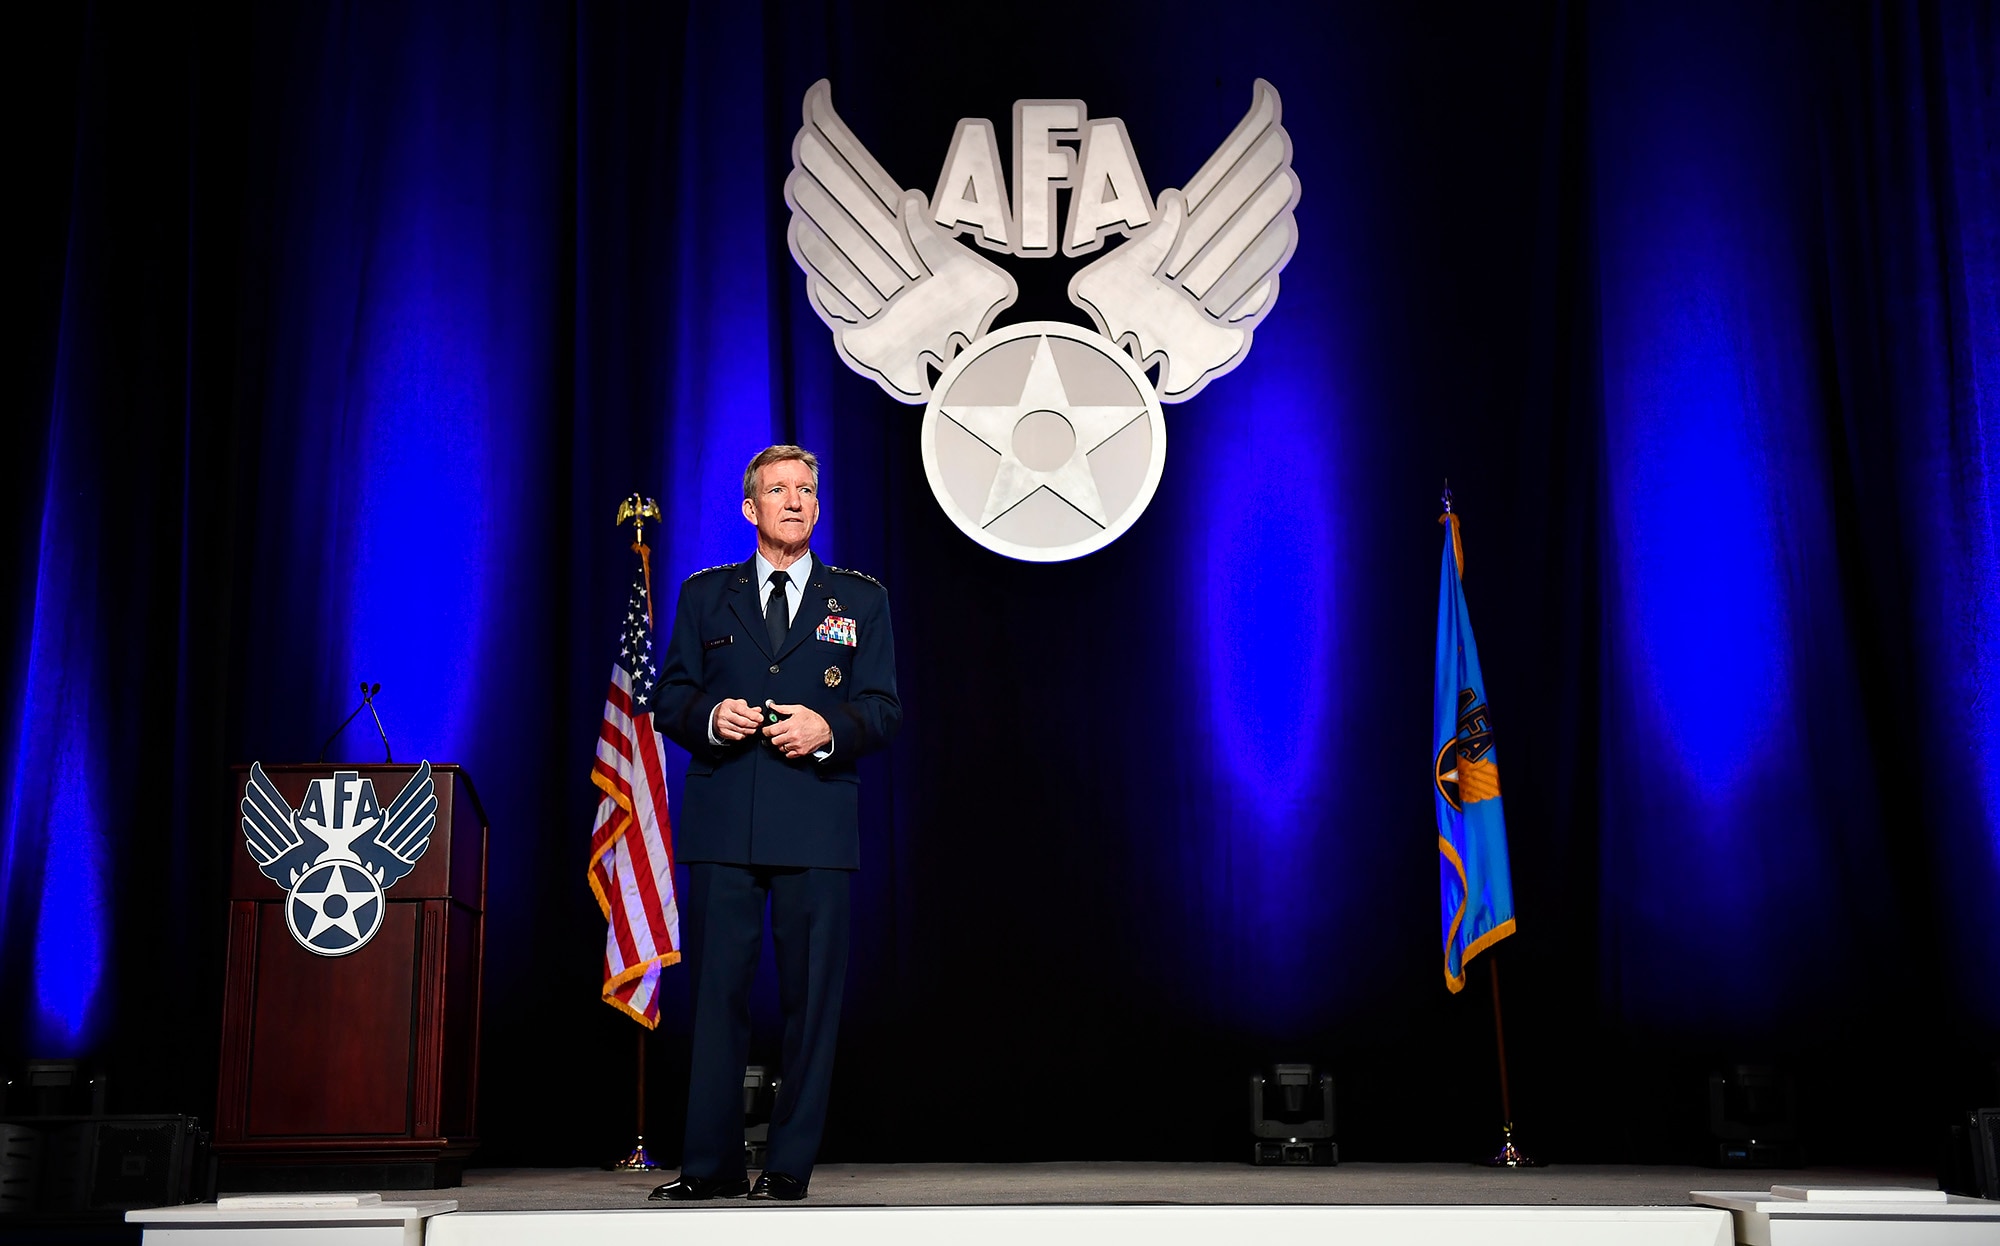 Gen. Hawk Carlisle, the Air Combat Command commander, speaks about the future of command and control and fusion warfare at the Air Force Association Air Warfare Symposium March 2, 2017, in Orlando, Fla. (U.S. Air Force photo/Scott M. Ash)